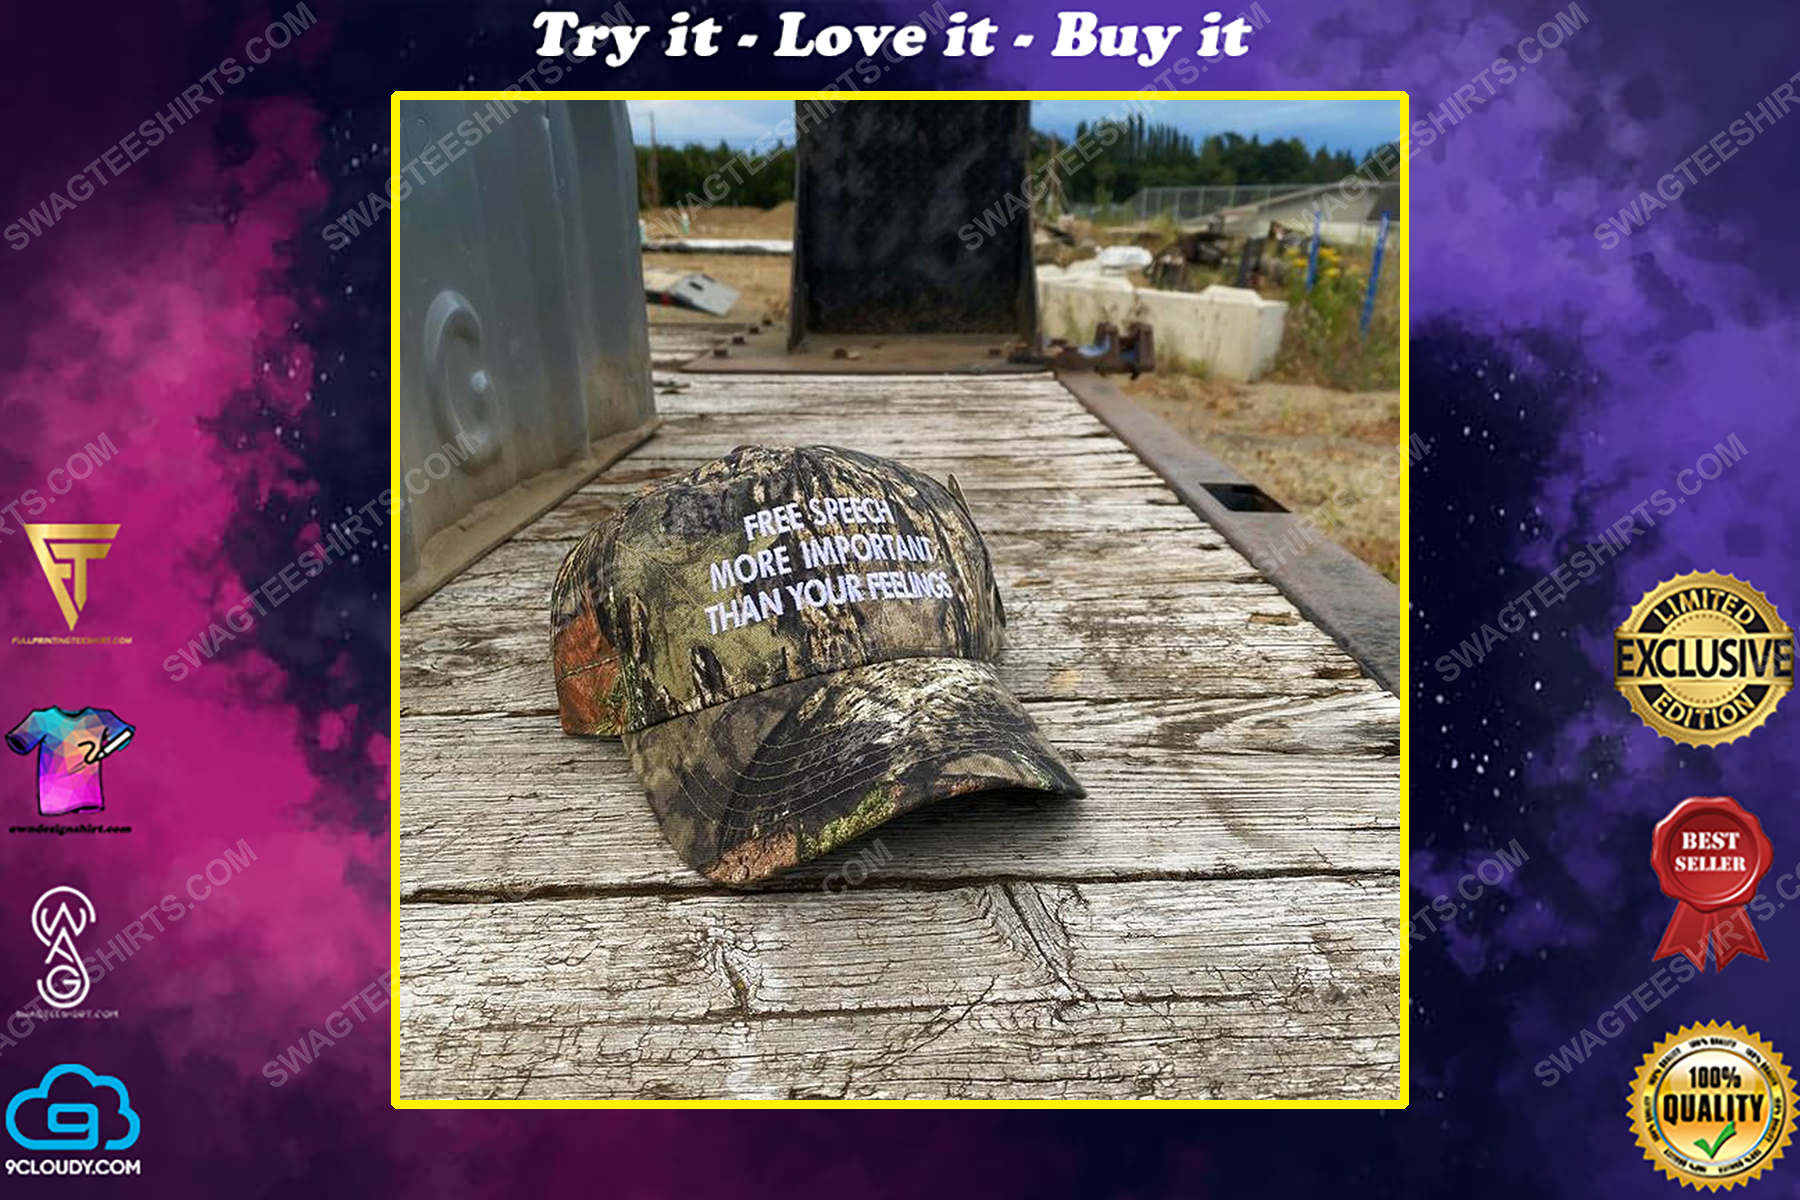 Camo free speech more important than your feelings full print classic hat